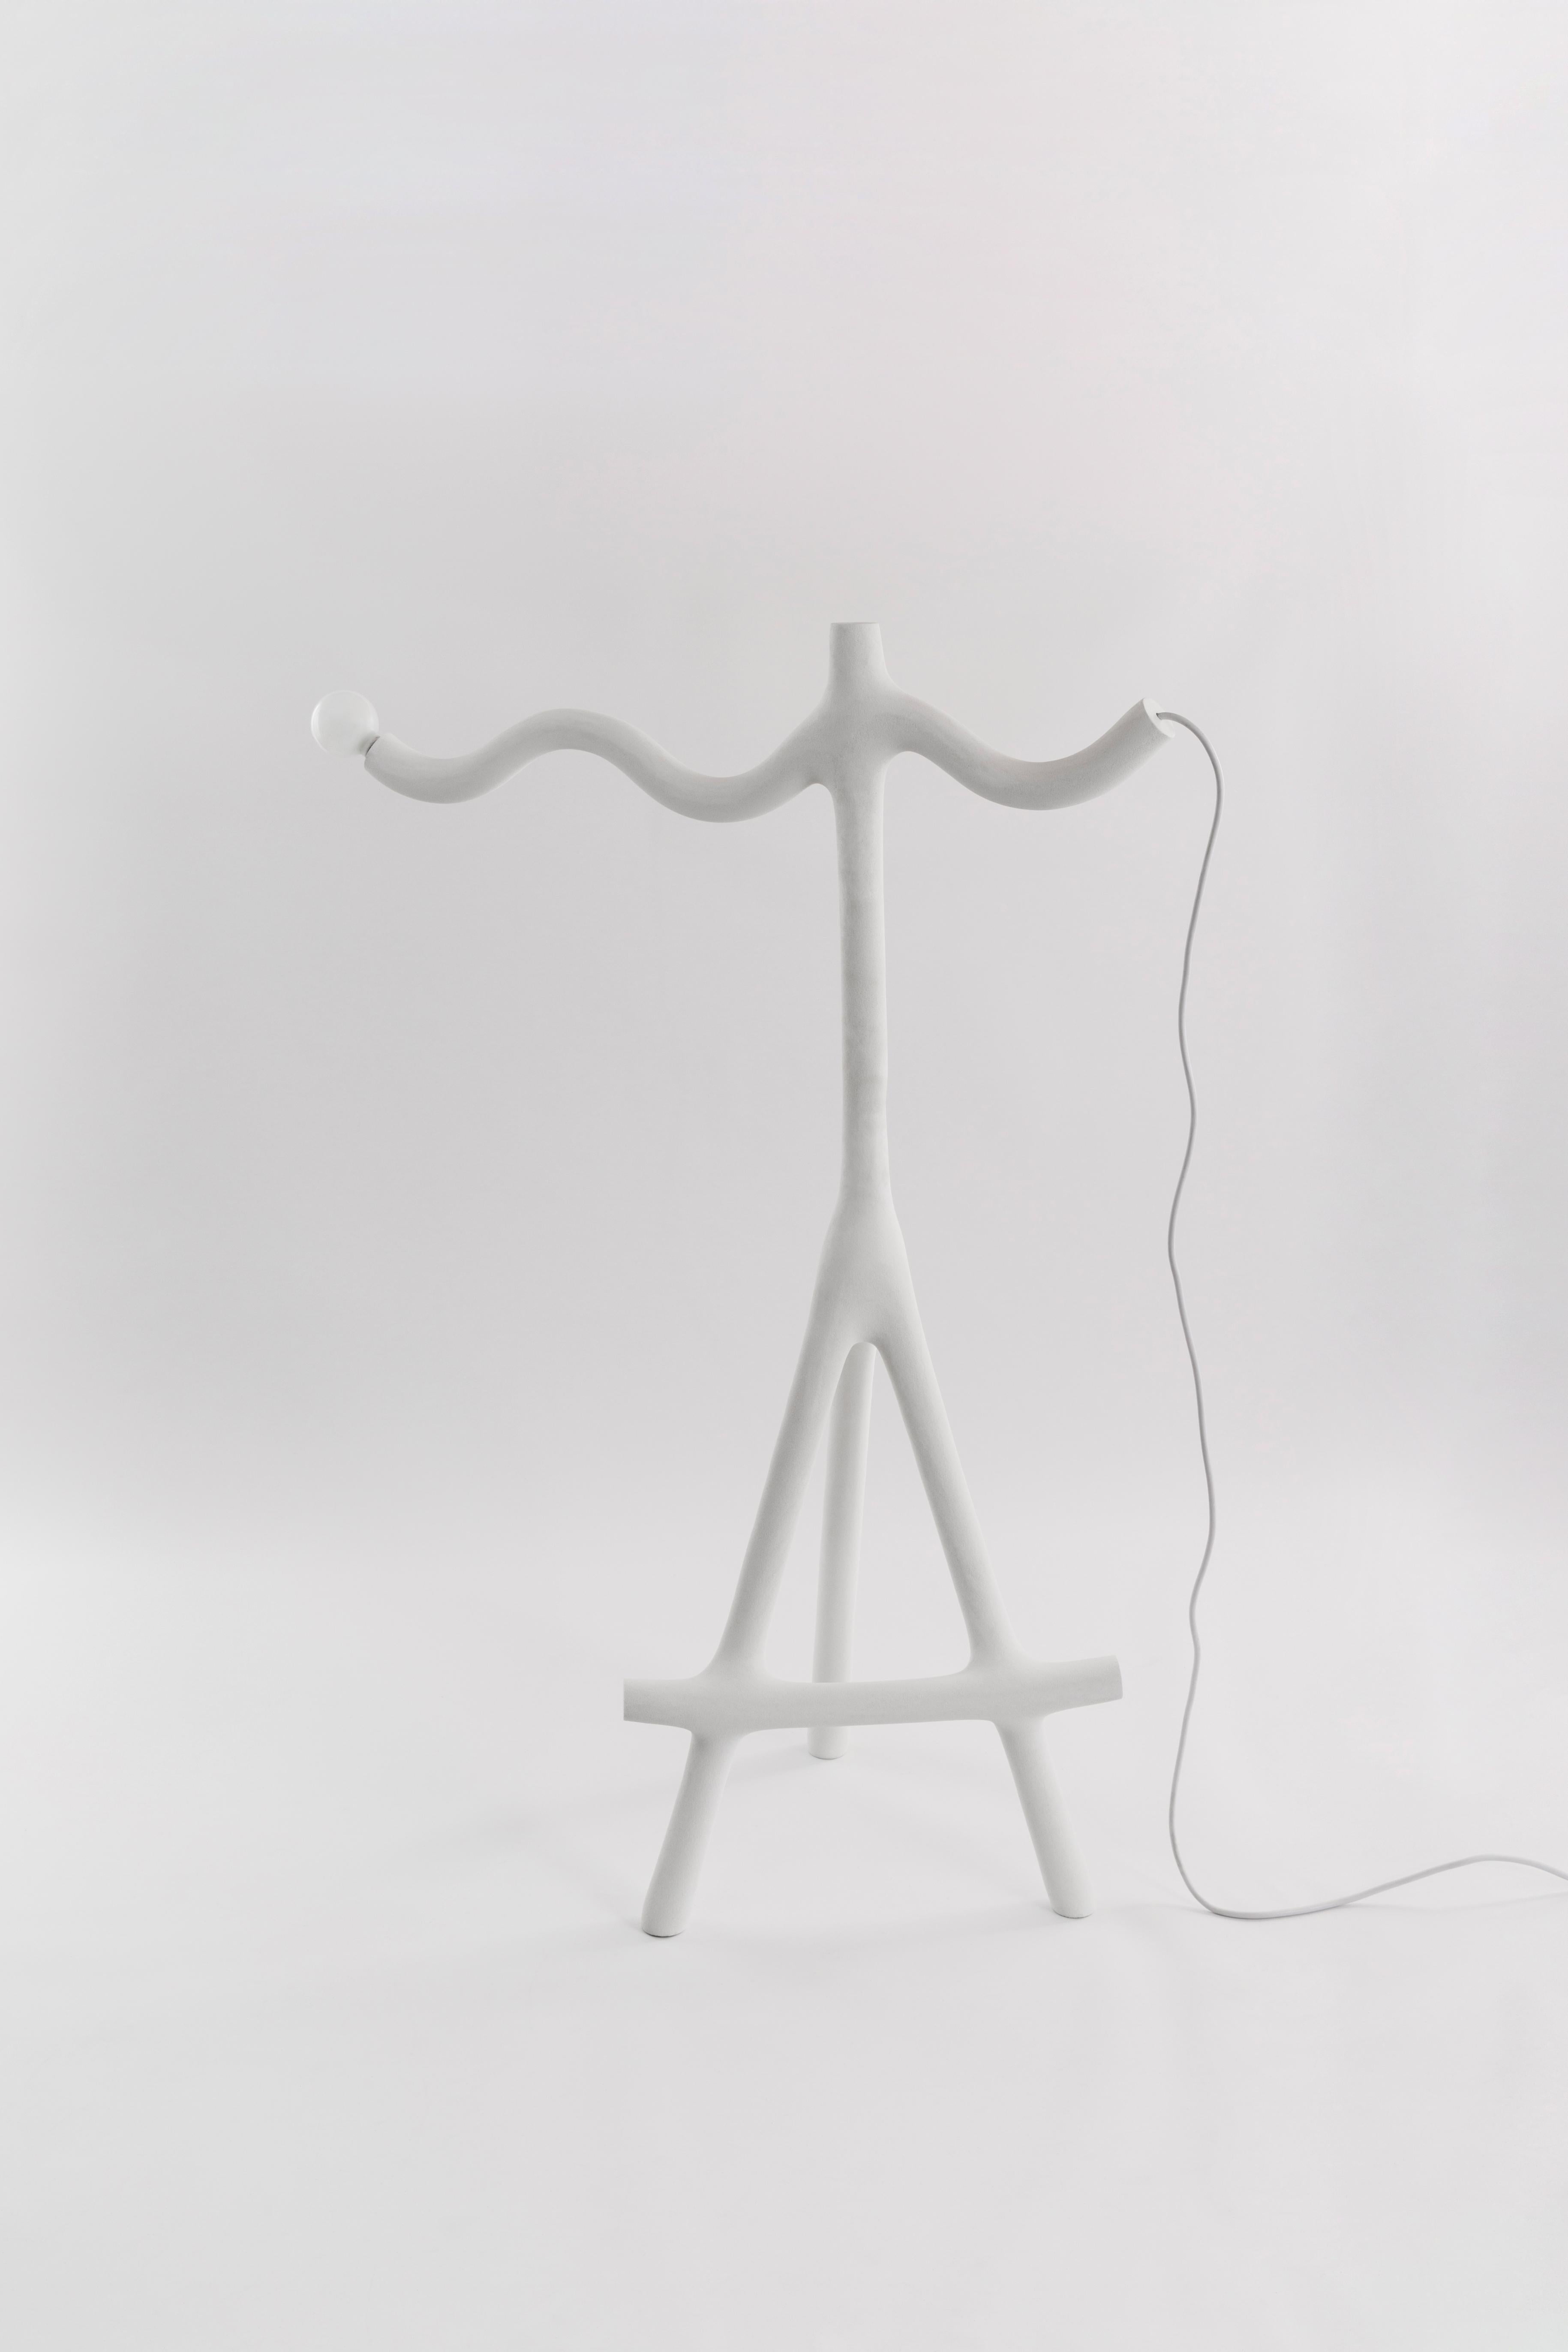 Wave and sticks lamp by HWE
Limited edition
Materials: Waste SLS 3D nylon powder, Sand from sustainable sources
Dimensions: L 110 x W 53 x H 168 cm 
Colour: white

All our lamps can be wired according to each country. If sold to the USA it will be